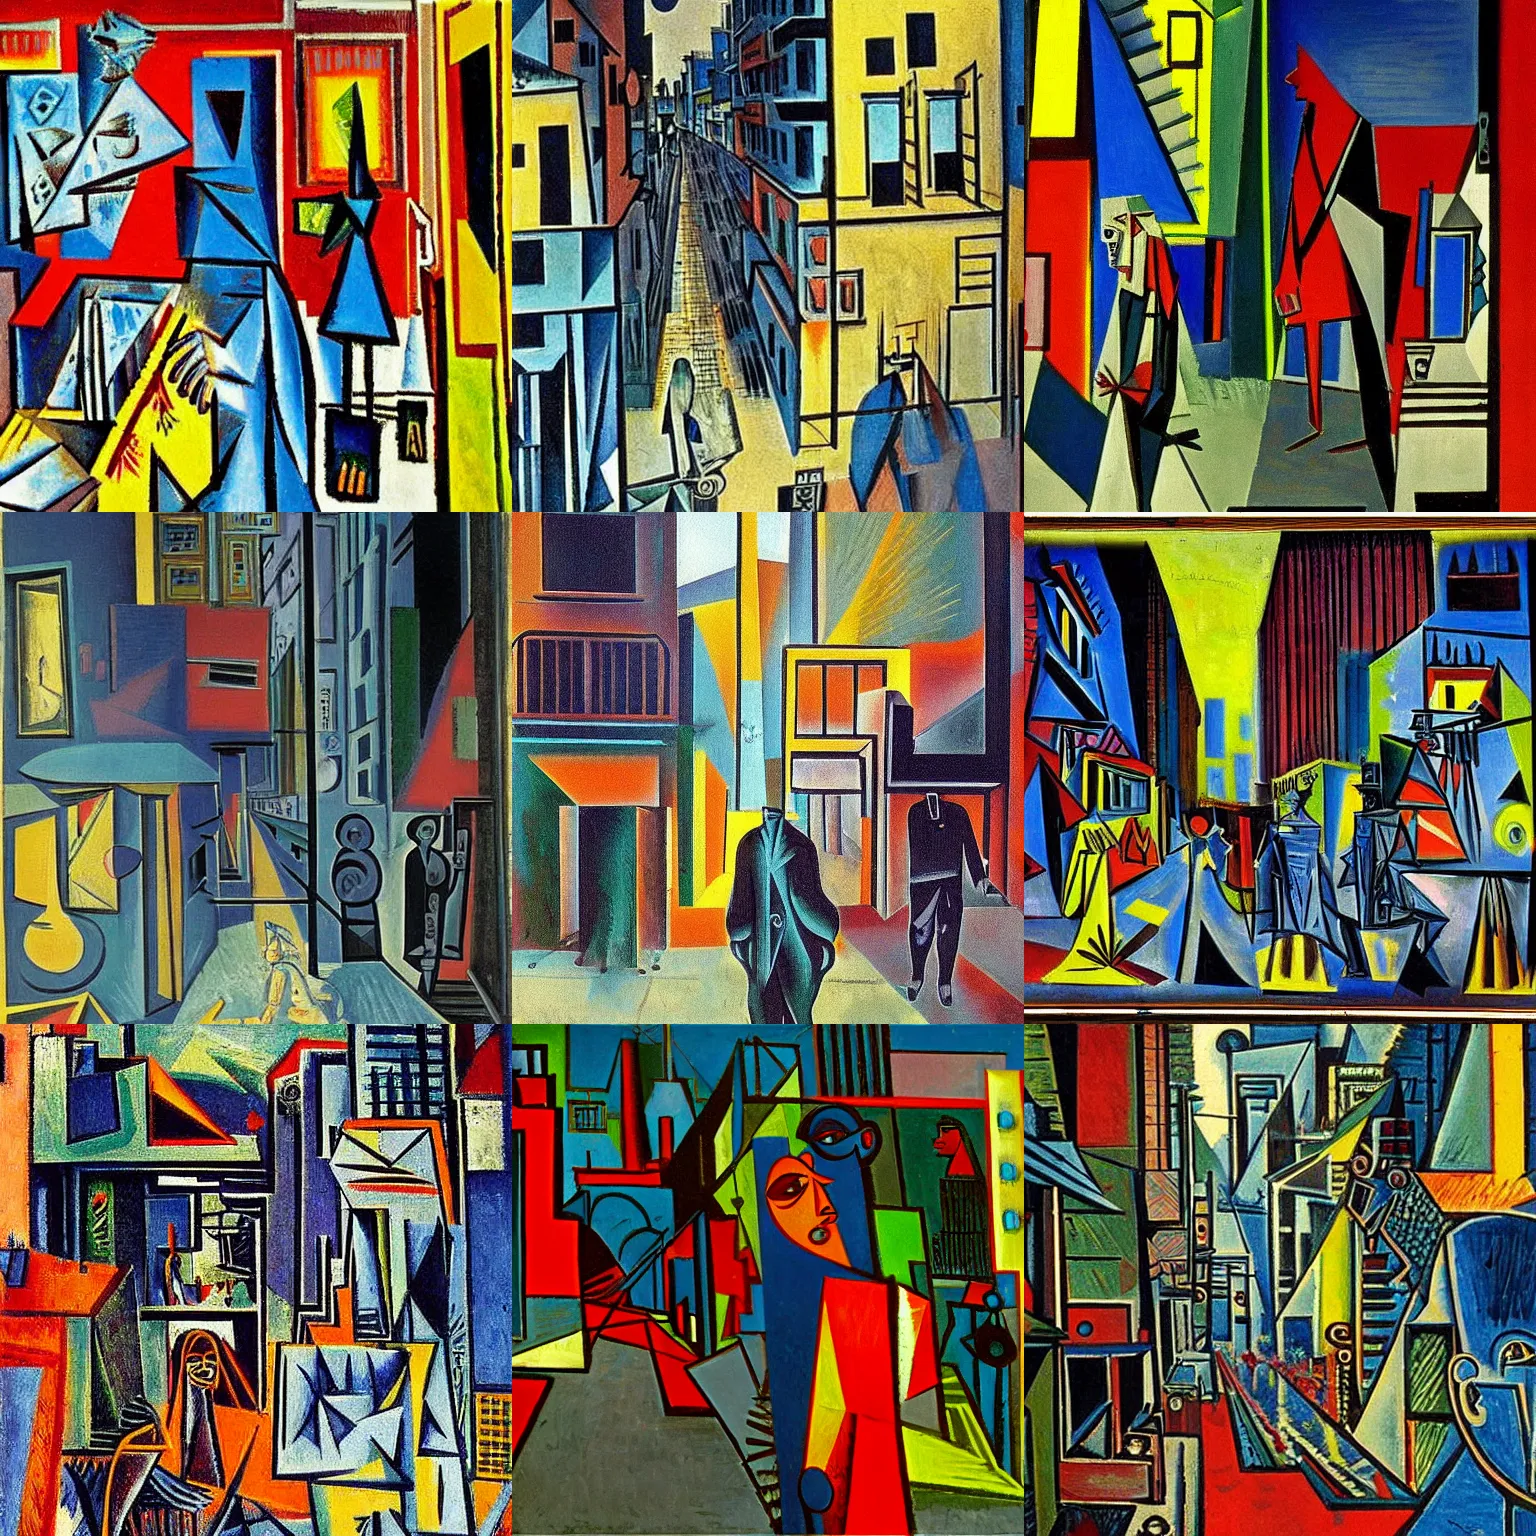 Prompt: A cyberpunk street scene painted by Pablo Picasso